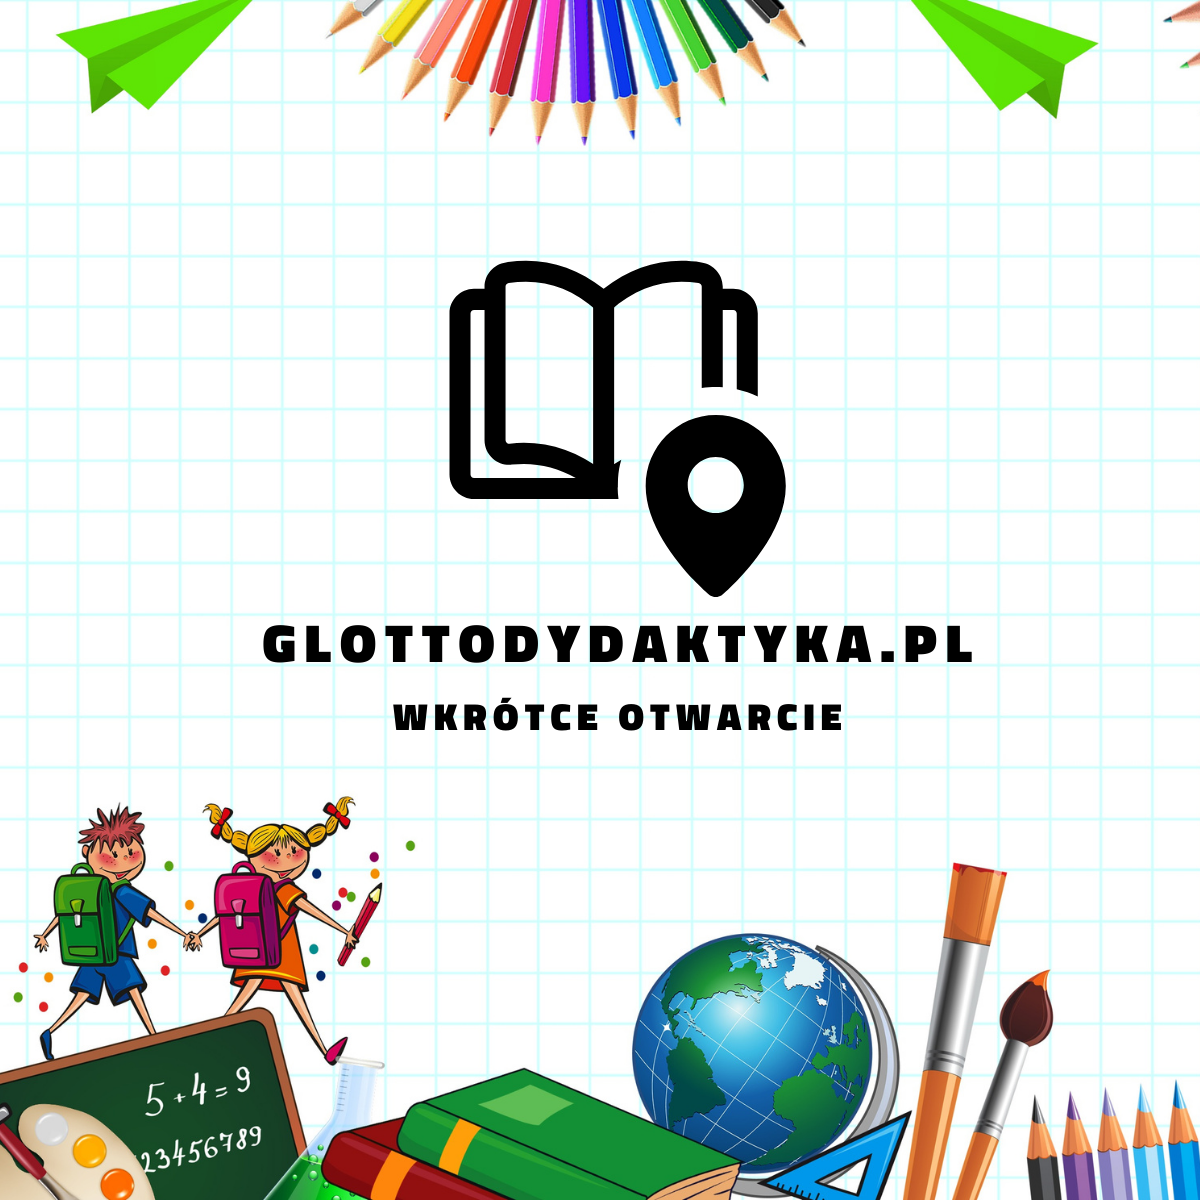 School background with site name